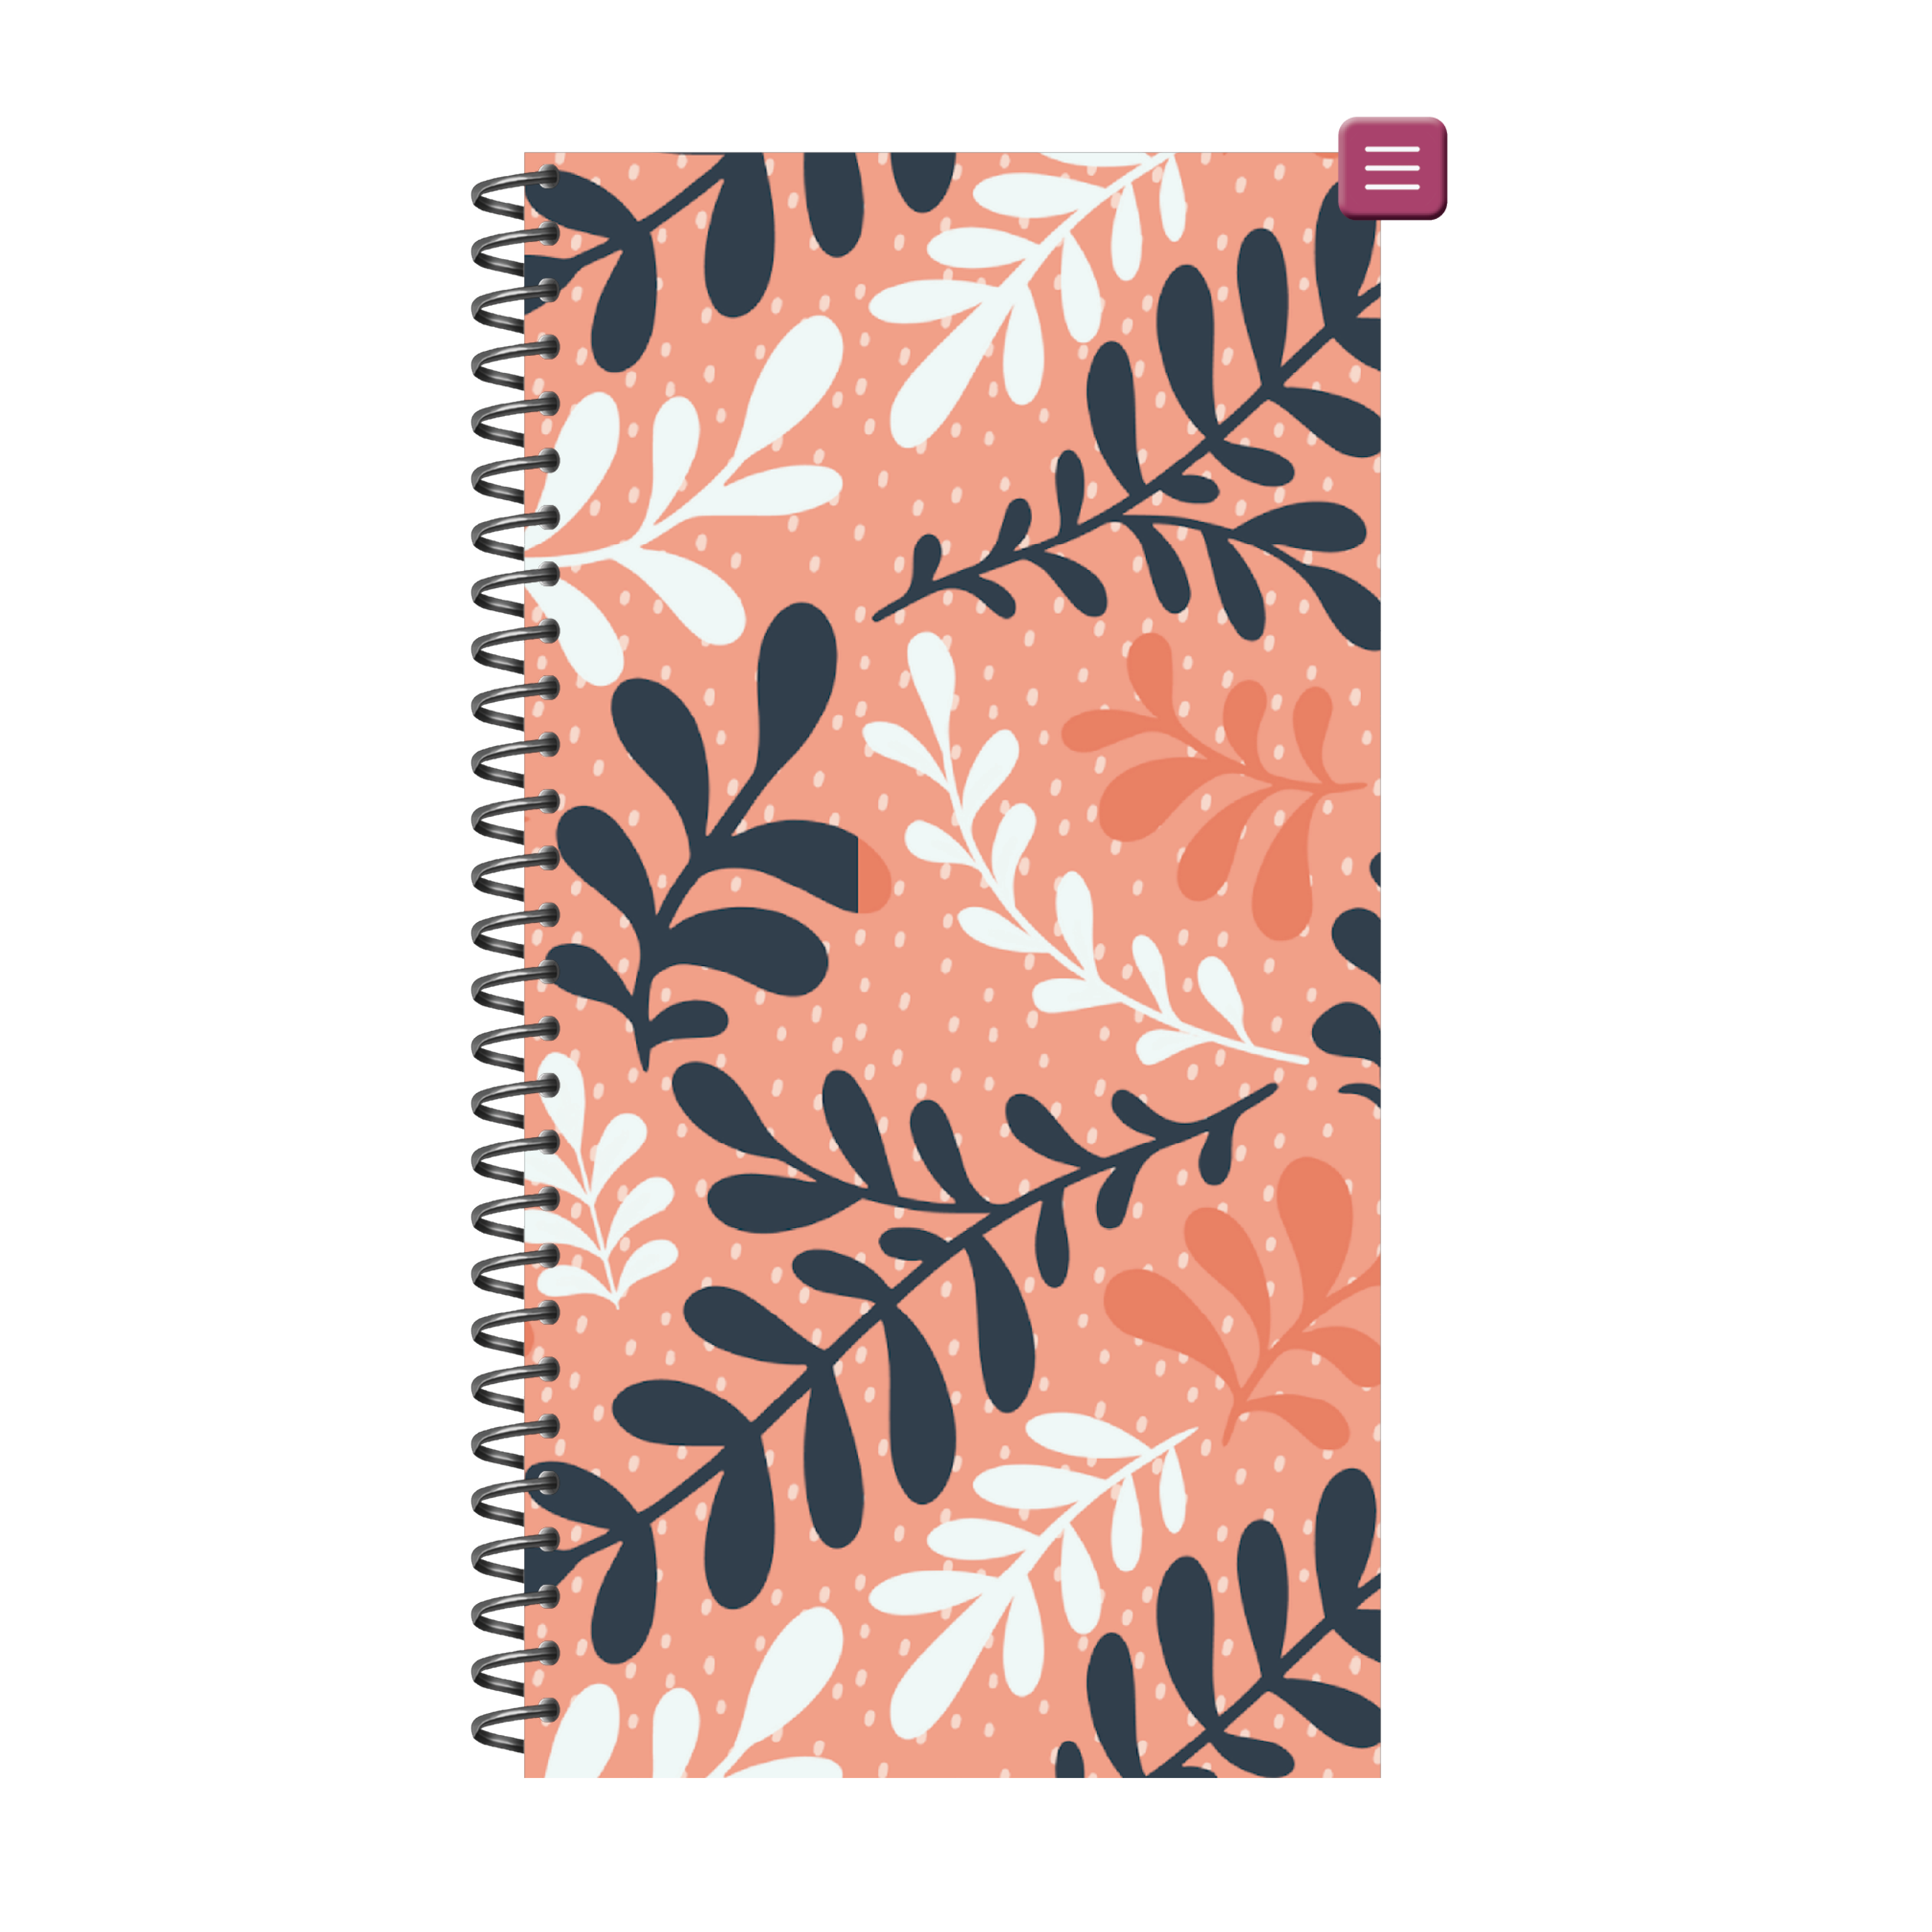 PhoneLife Interchangeable Digital Planner Cover | MIDNIGHT BOHO BLOSSOMS 6